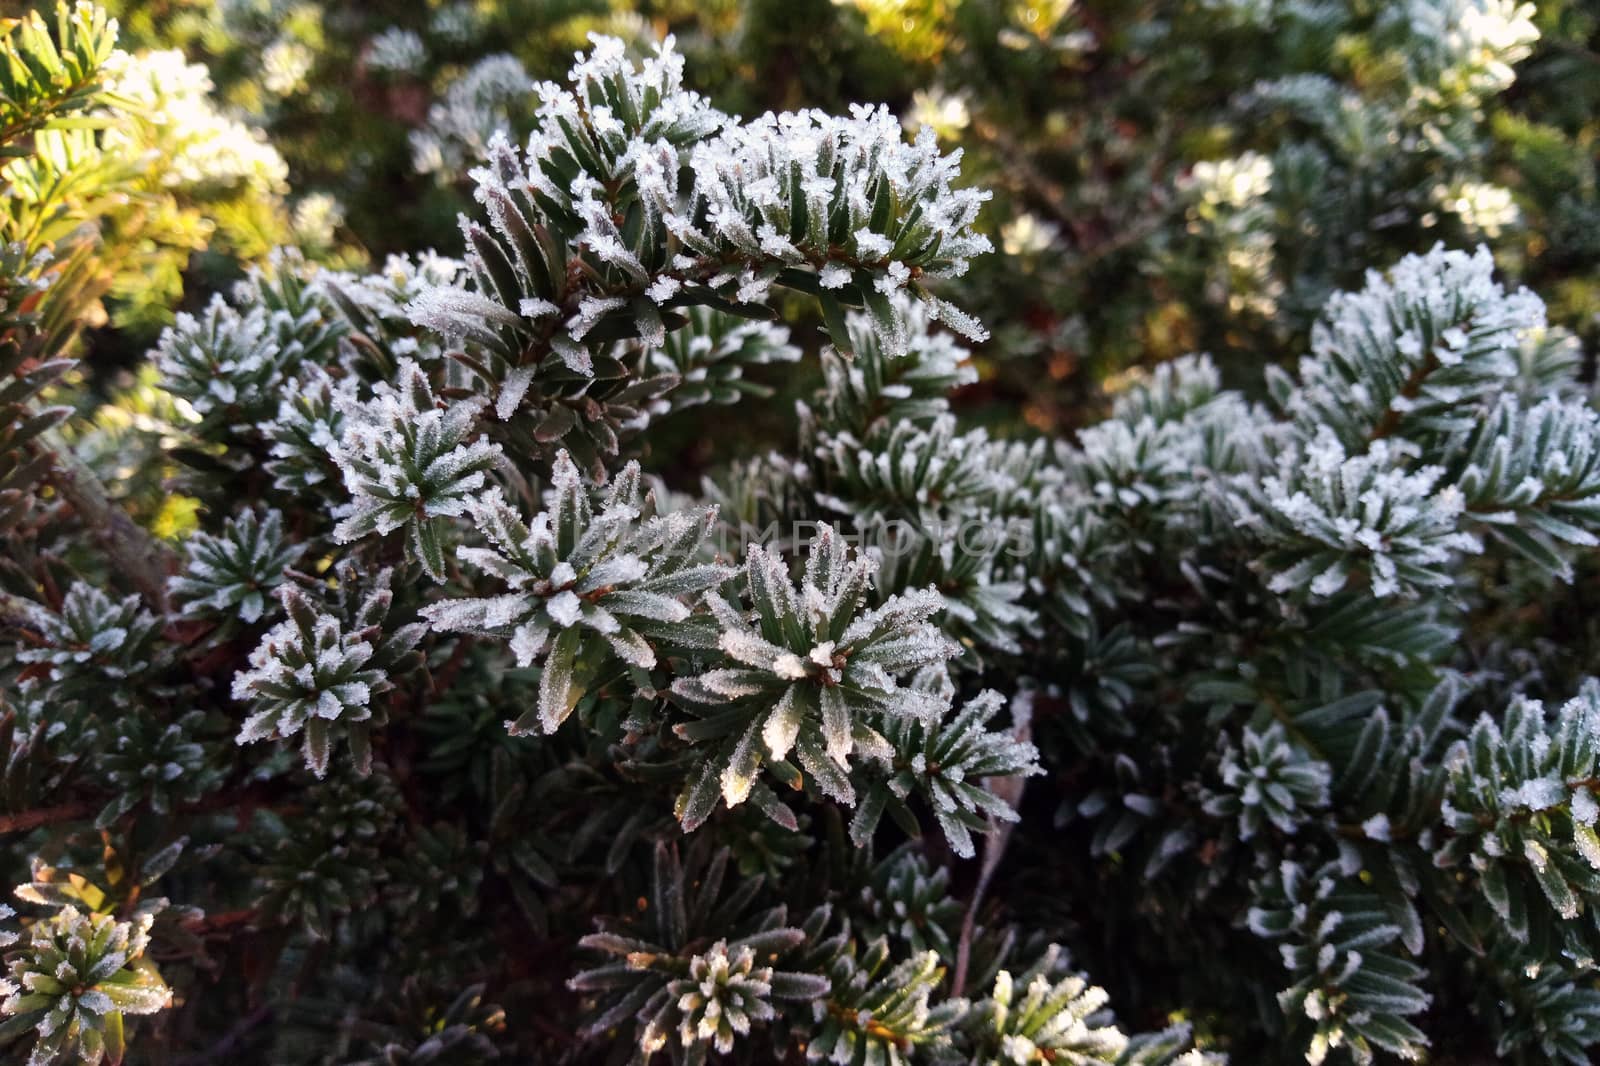 The plant is covered with ice on a frosty cold morning